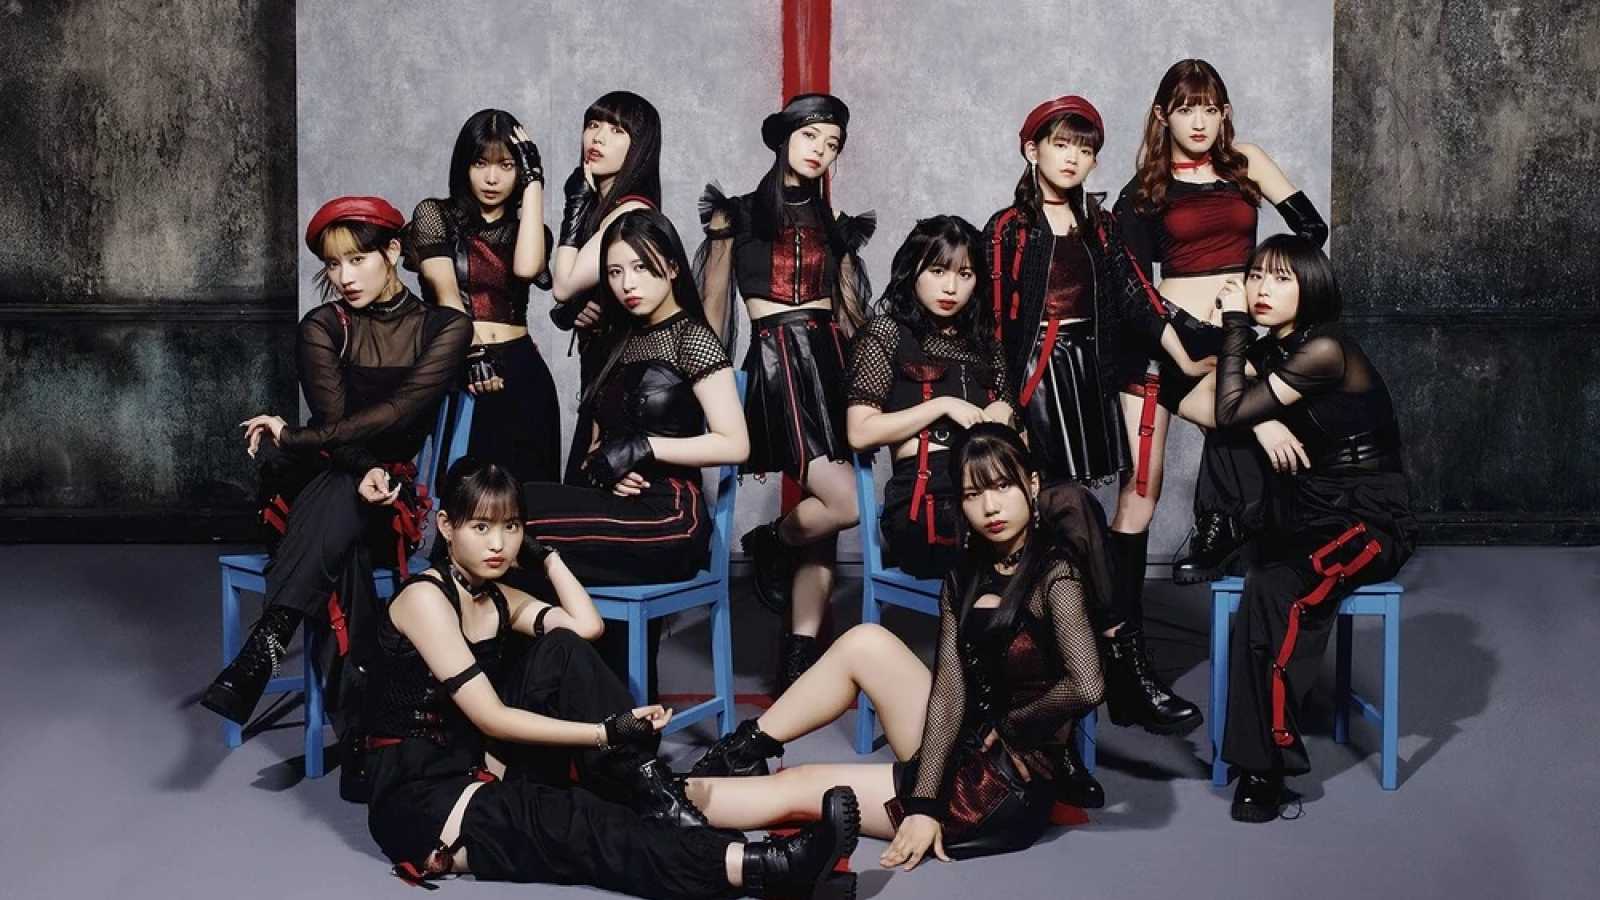 ANGERME mit neuer Single im Juni © DC FACTORY. All rights reserved.